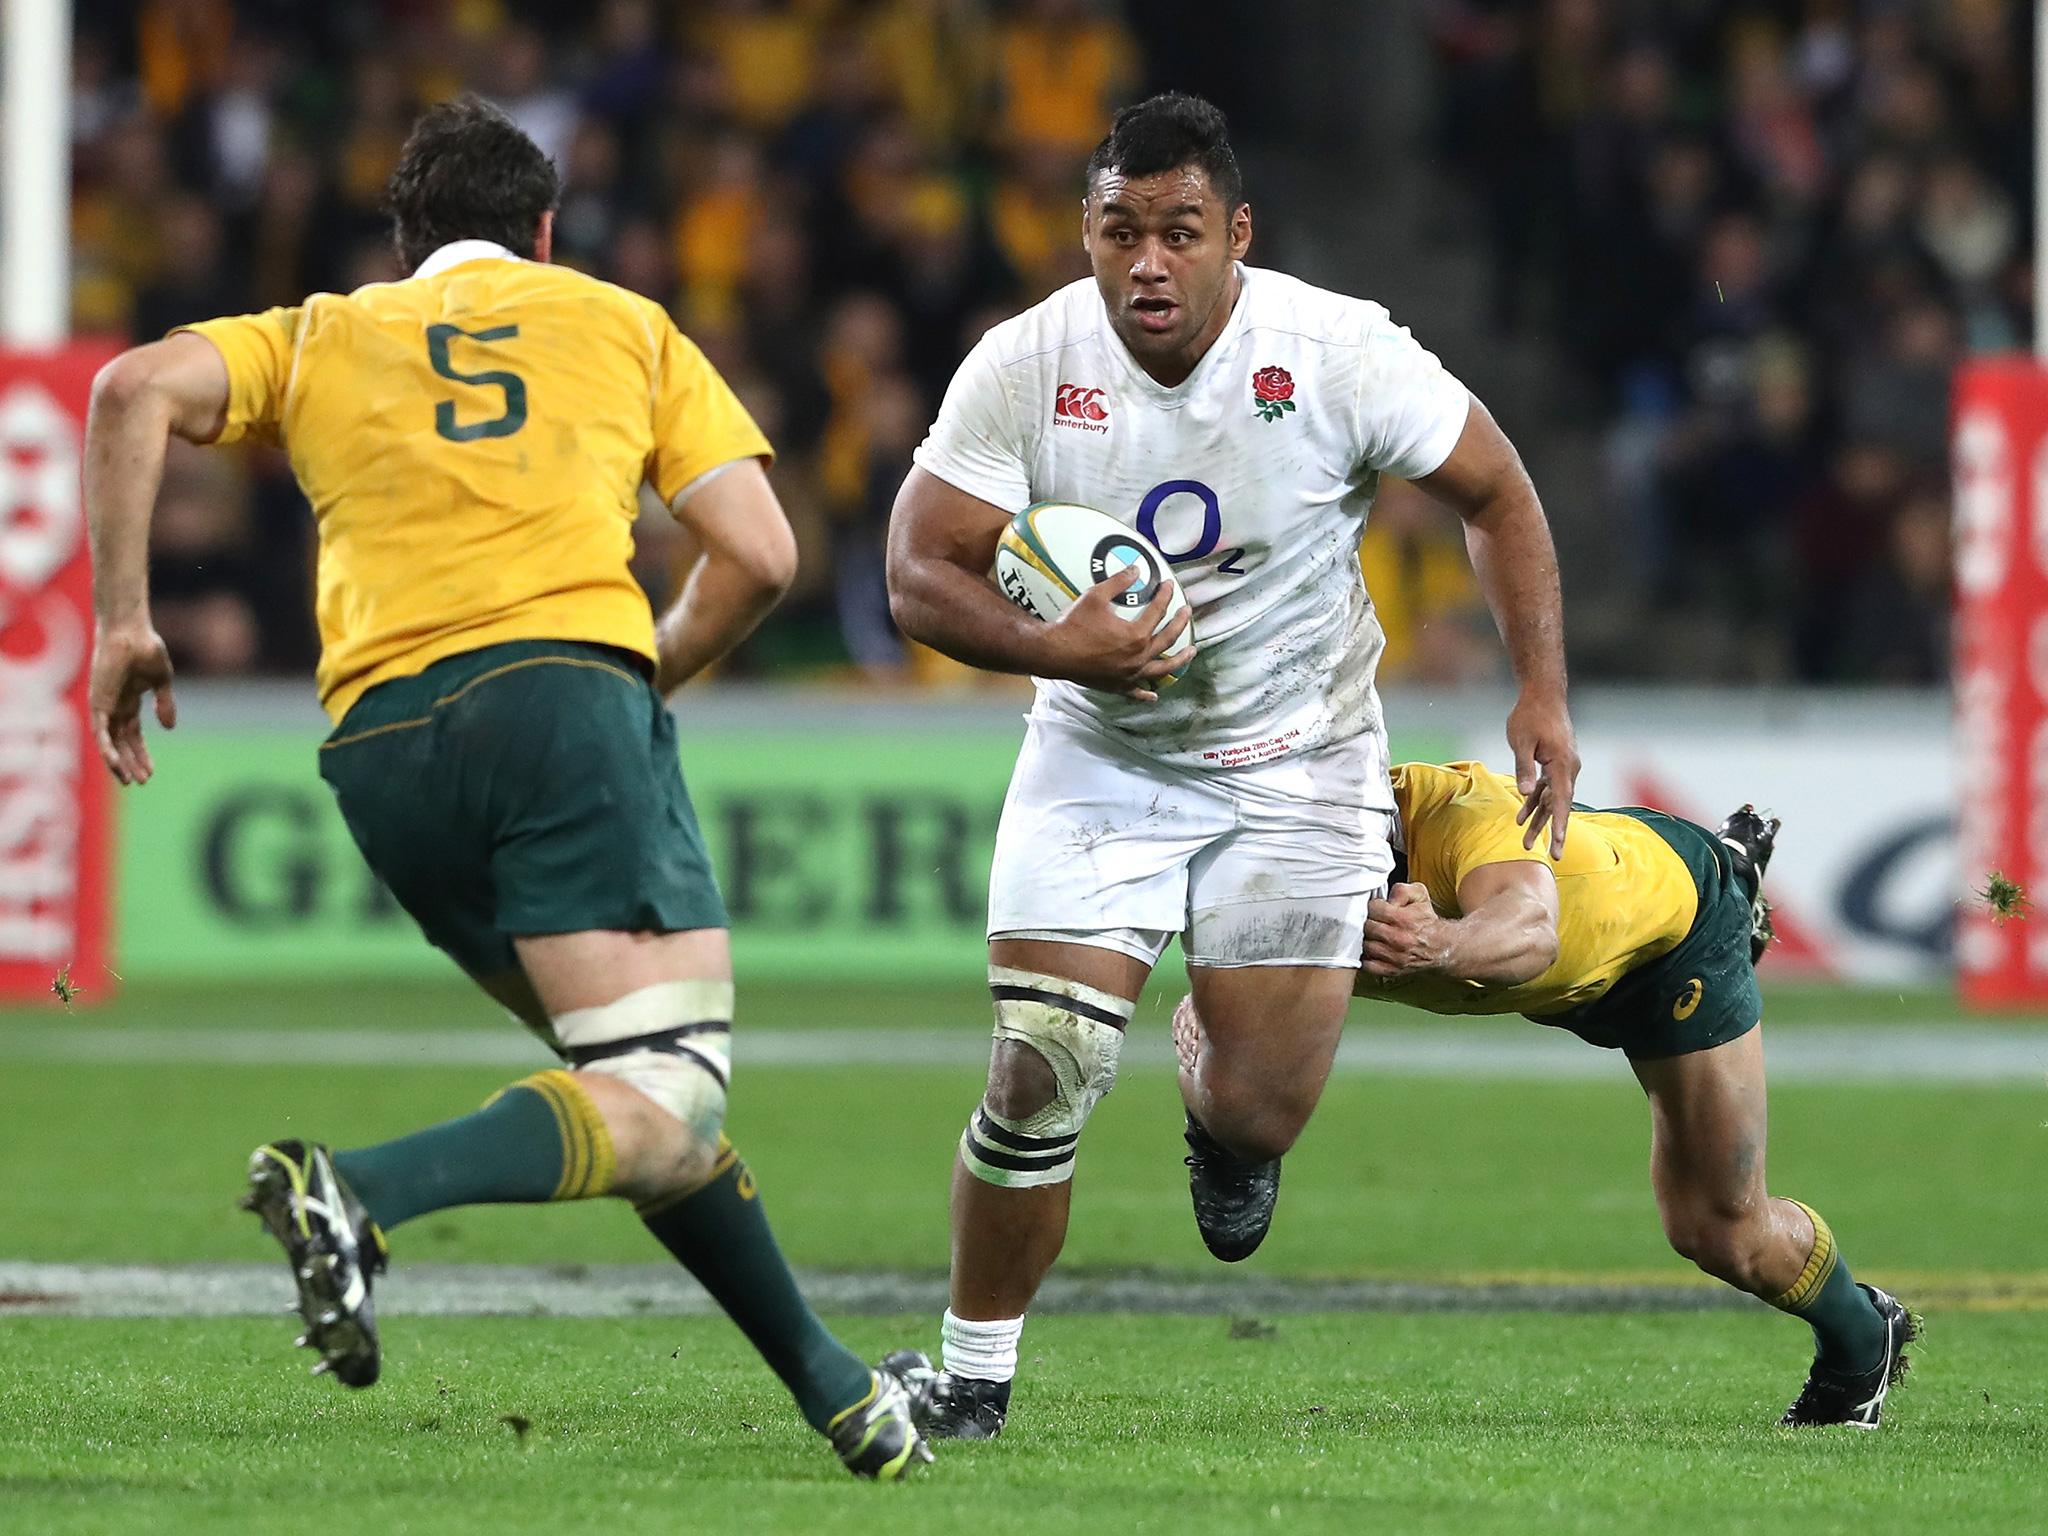 Billy Vunipola of England breaks with the ball